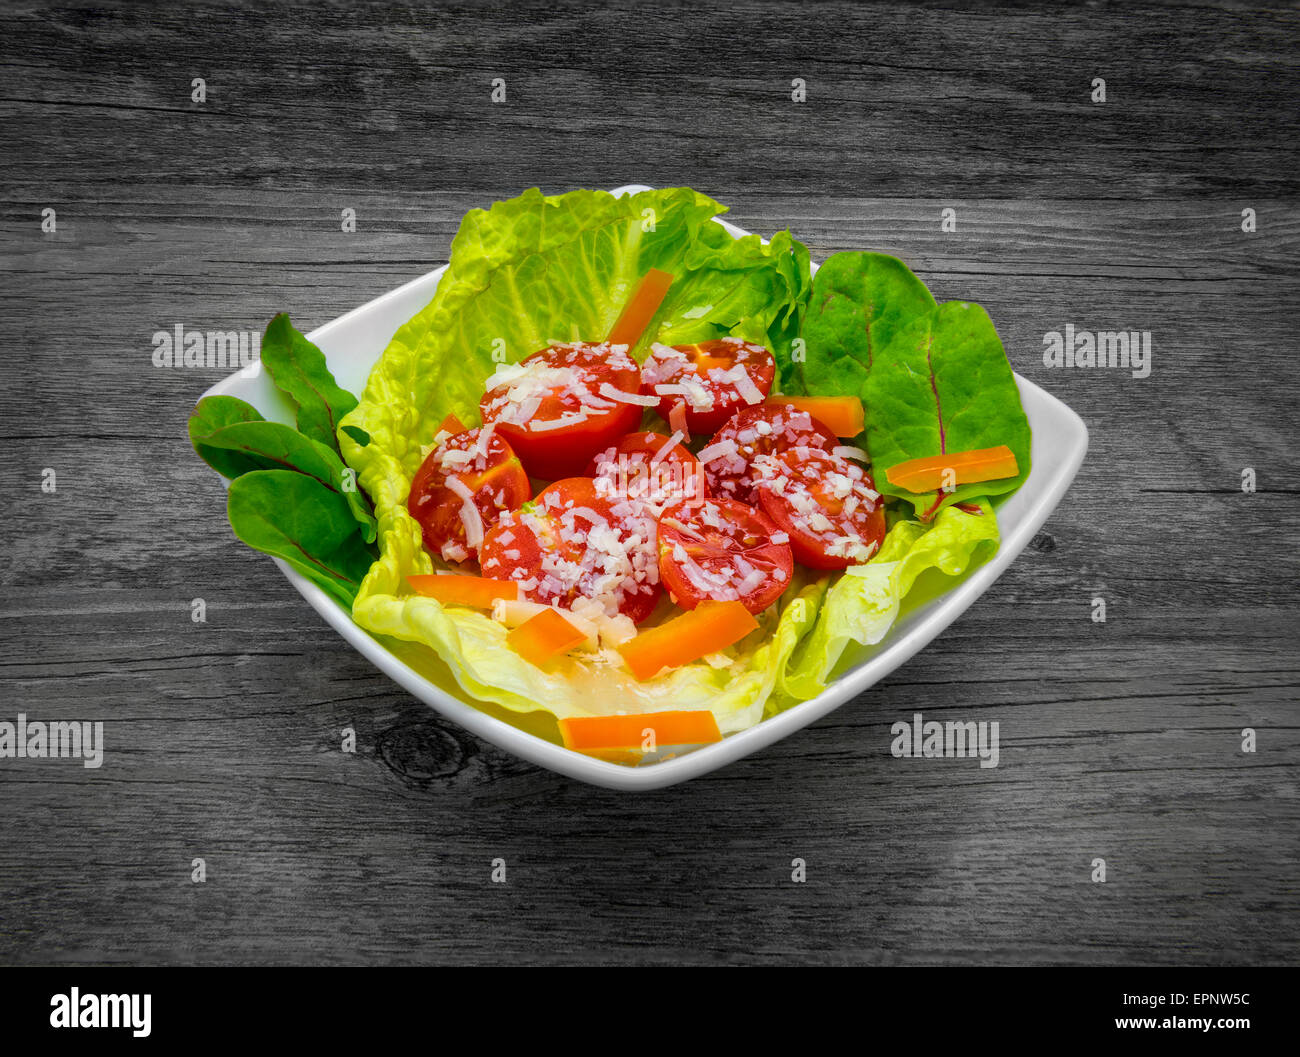 Fresh salad on a rustic wooden background. Stock Photo